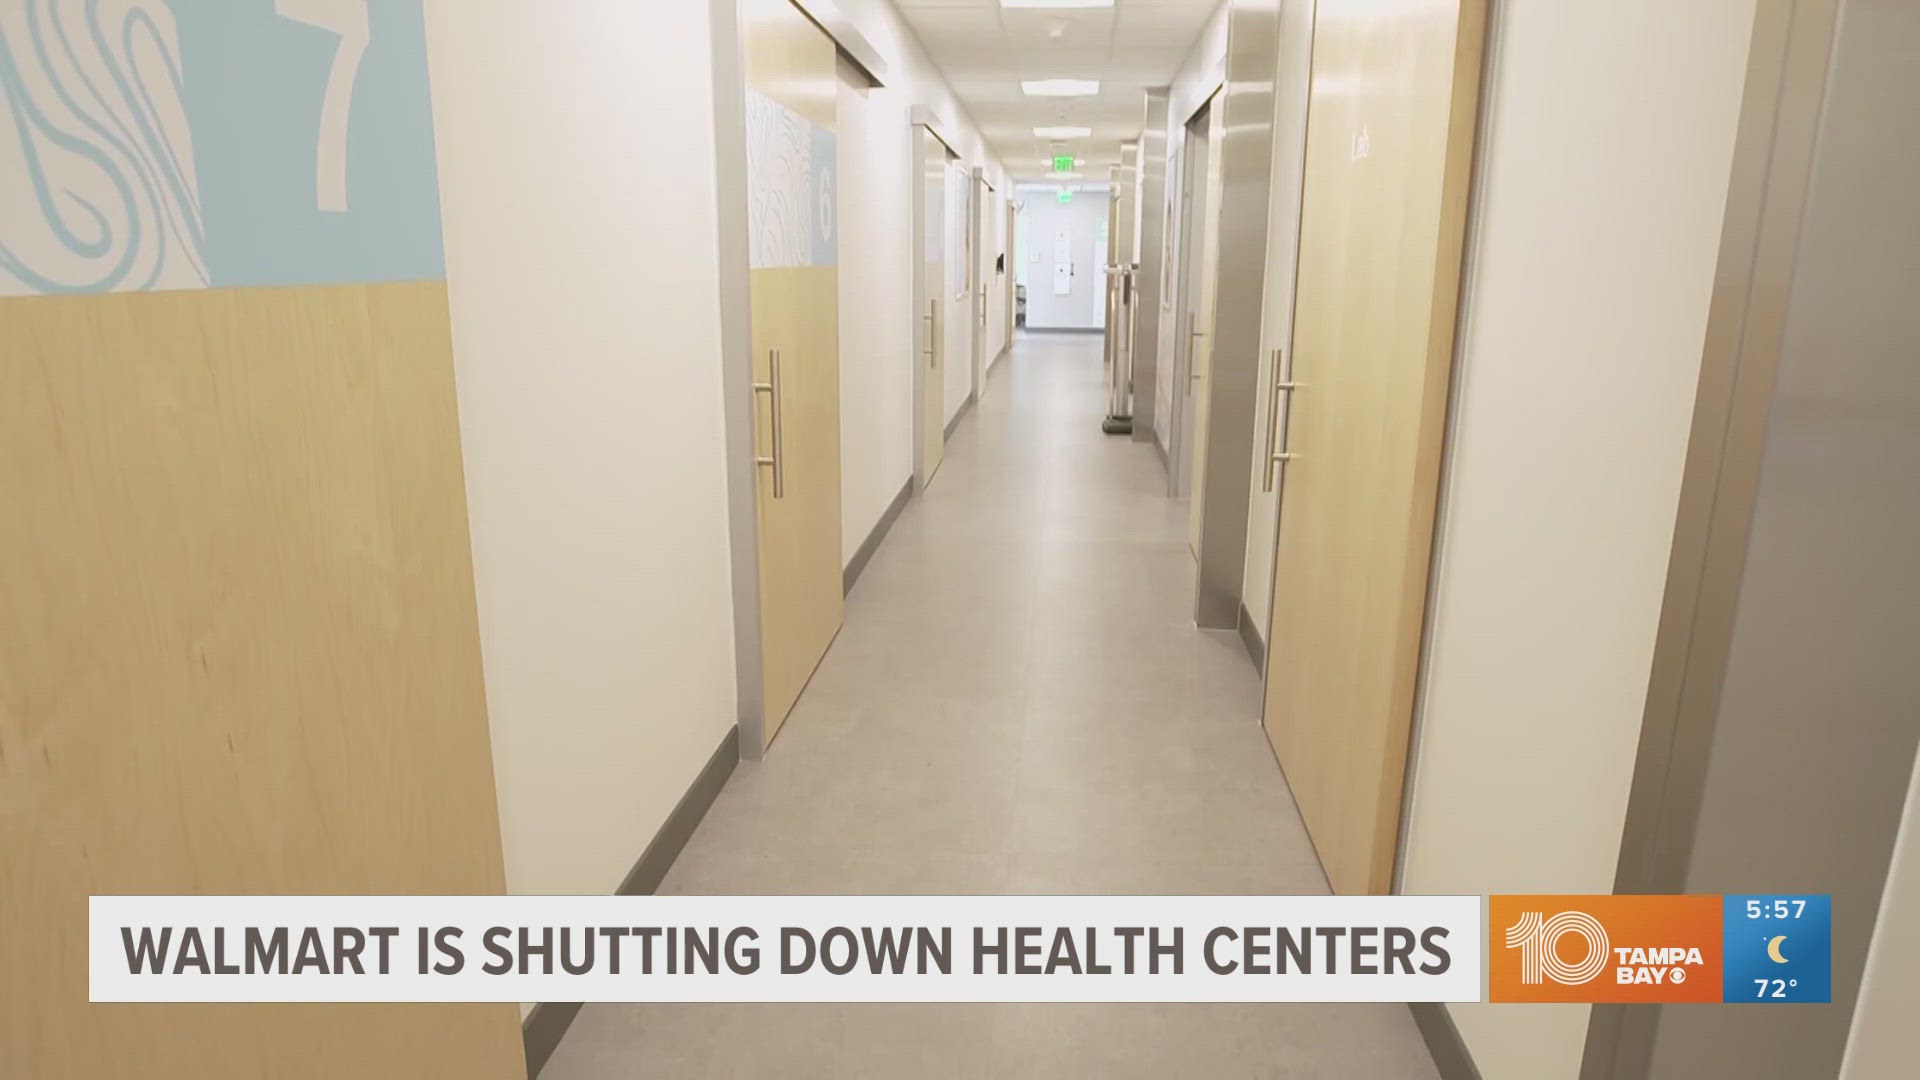 The news comes after the chain’s recent closure of its health centers and virtual service nationwide.